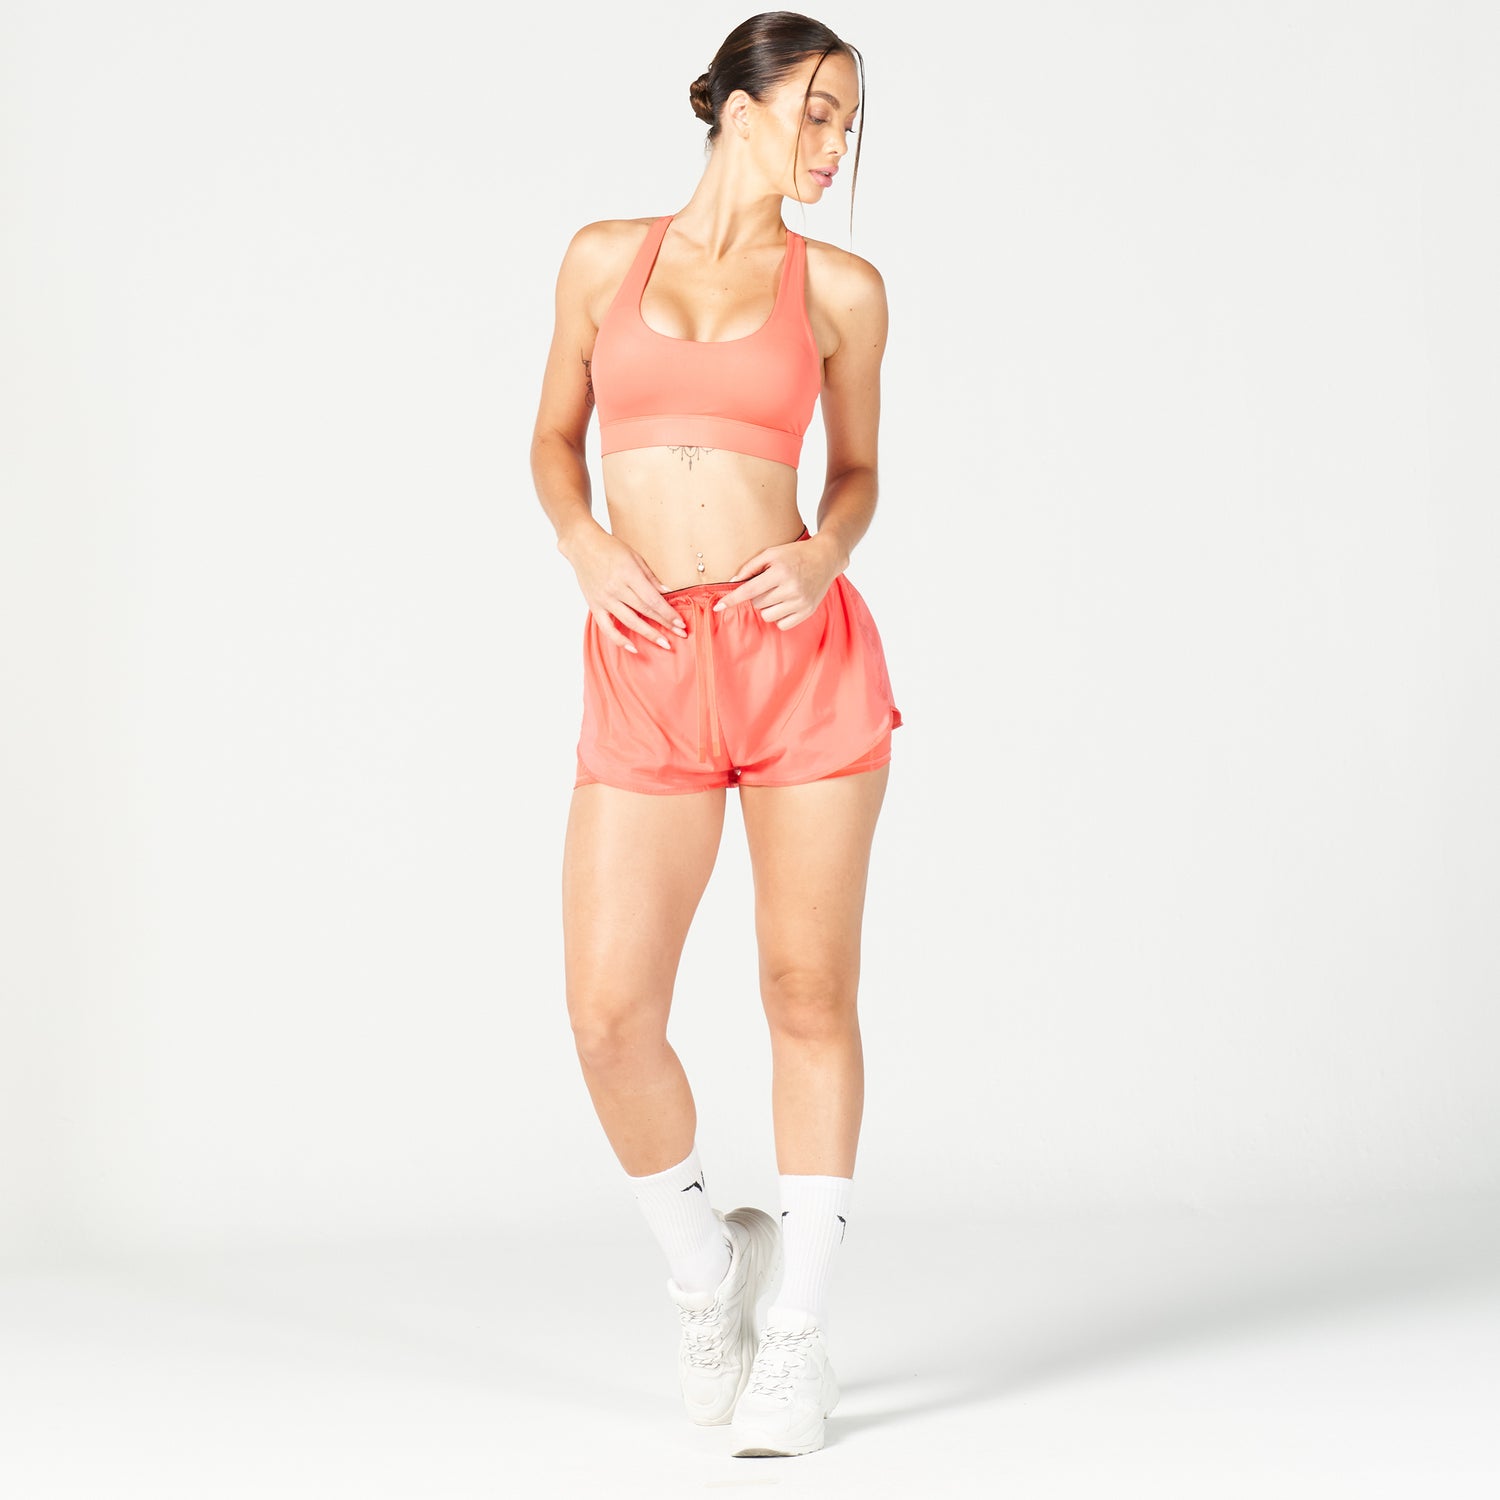 AE, Glaze 2-in-1 Shorts - Hot Coral, Workout Shorts Women